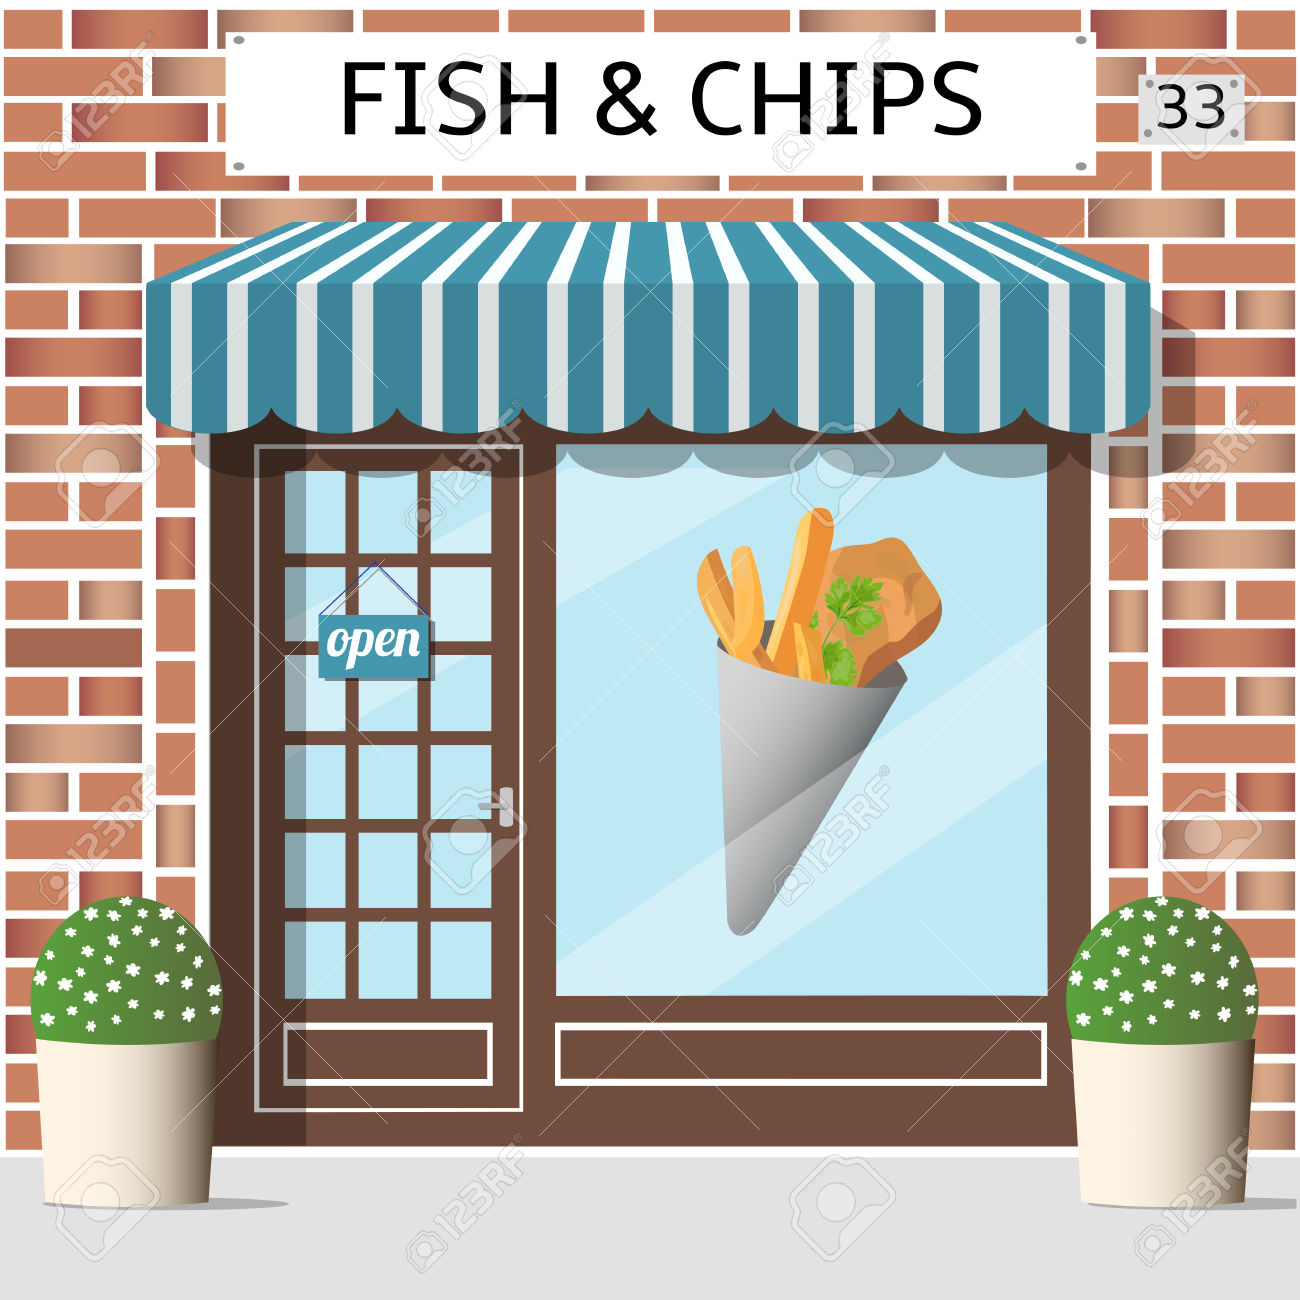 Fish And Chips Cafe Building. Sticker On Window. Red Brick Facade.